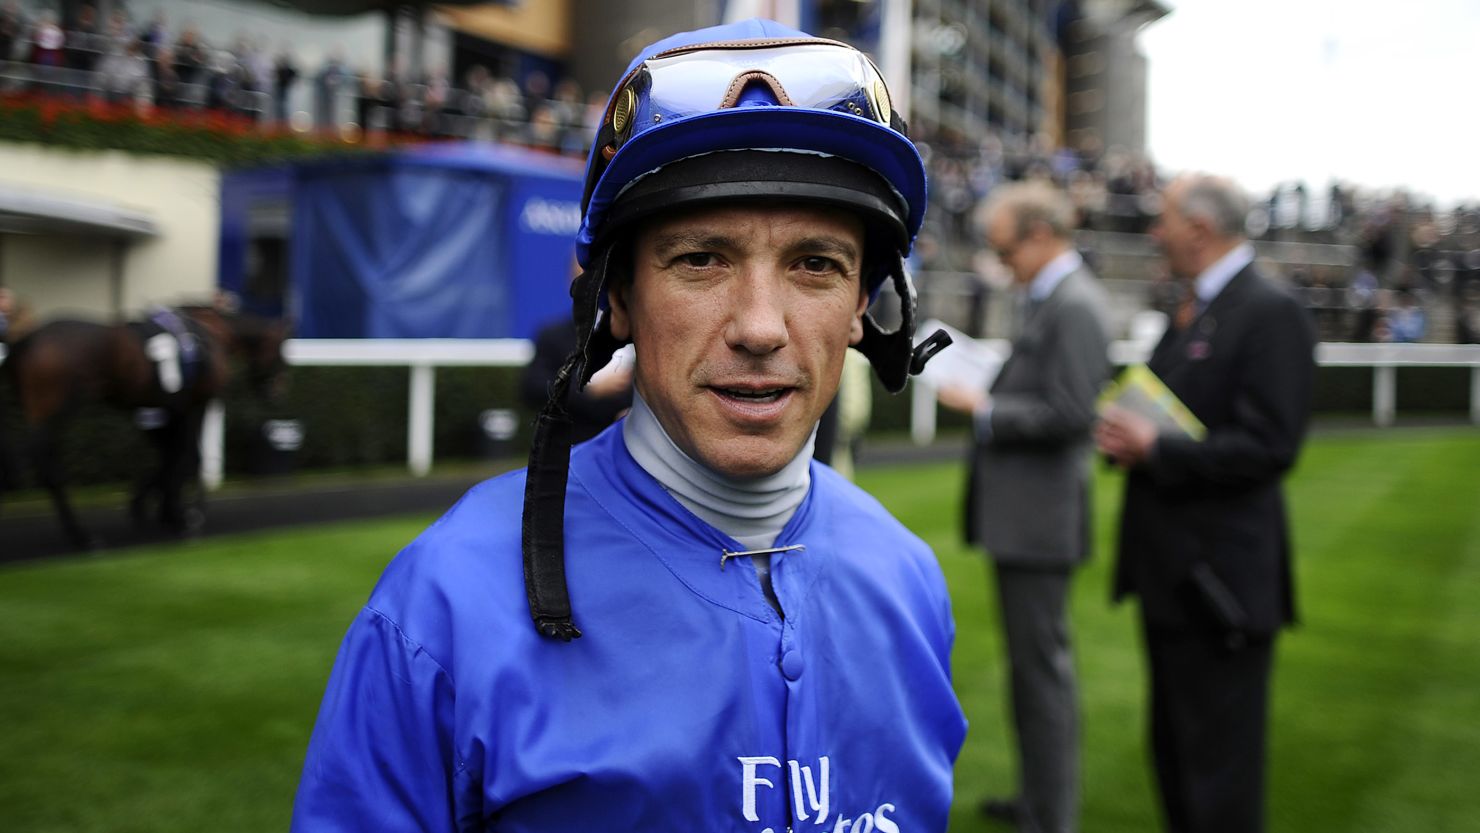 Frankie Dettori will be able to return to racing next May if he passes further drug tests.